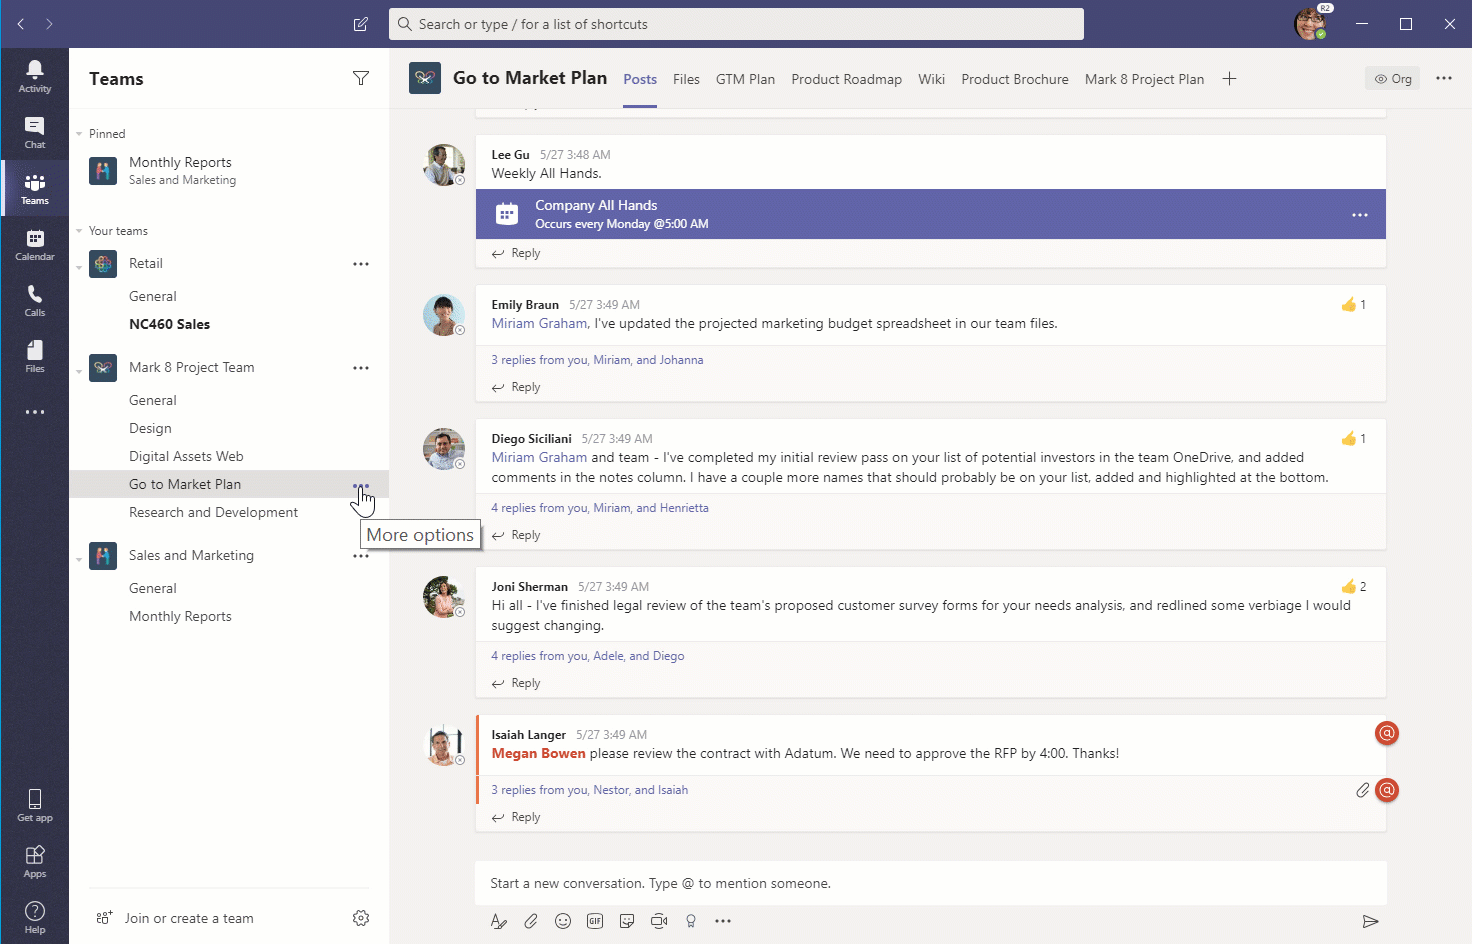 What is New in Microsoft Teams announced at Ignite 2019 Pinned%20Channels.gif